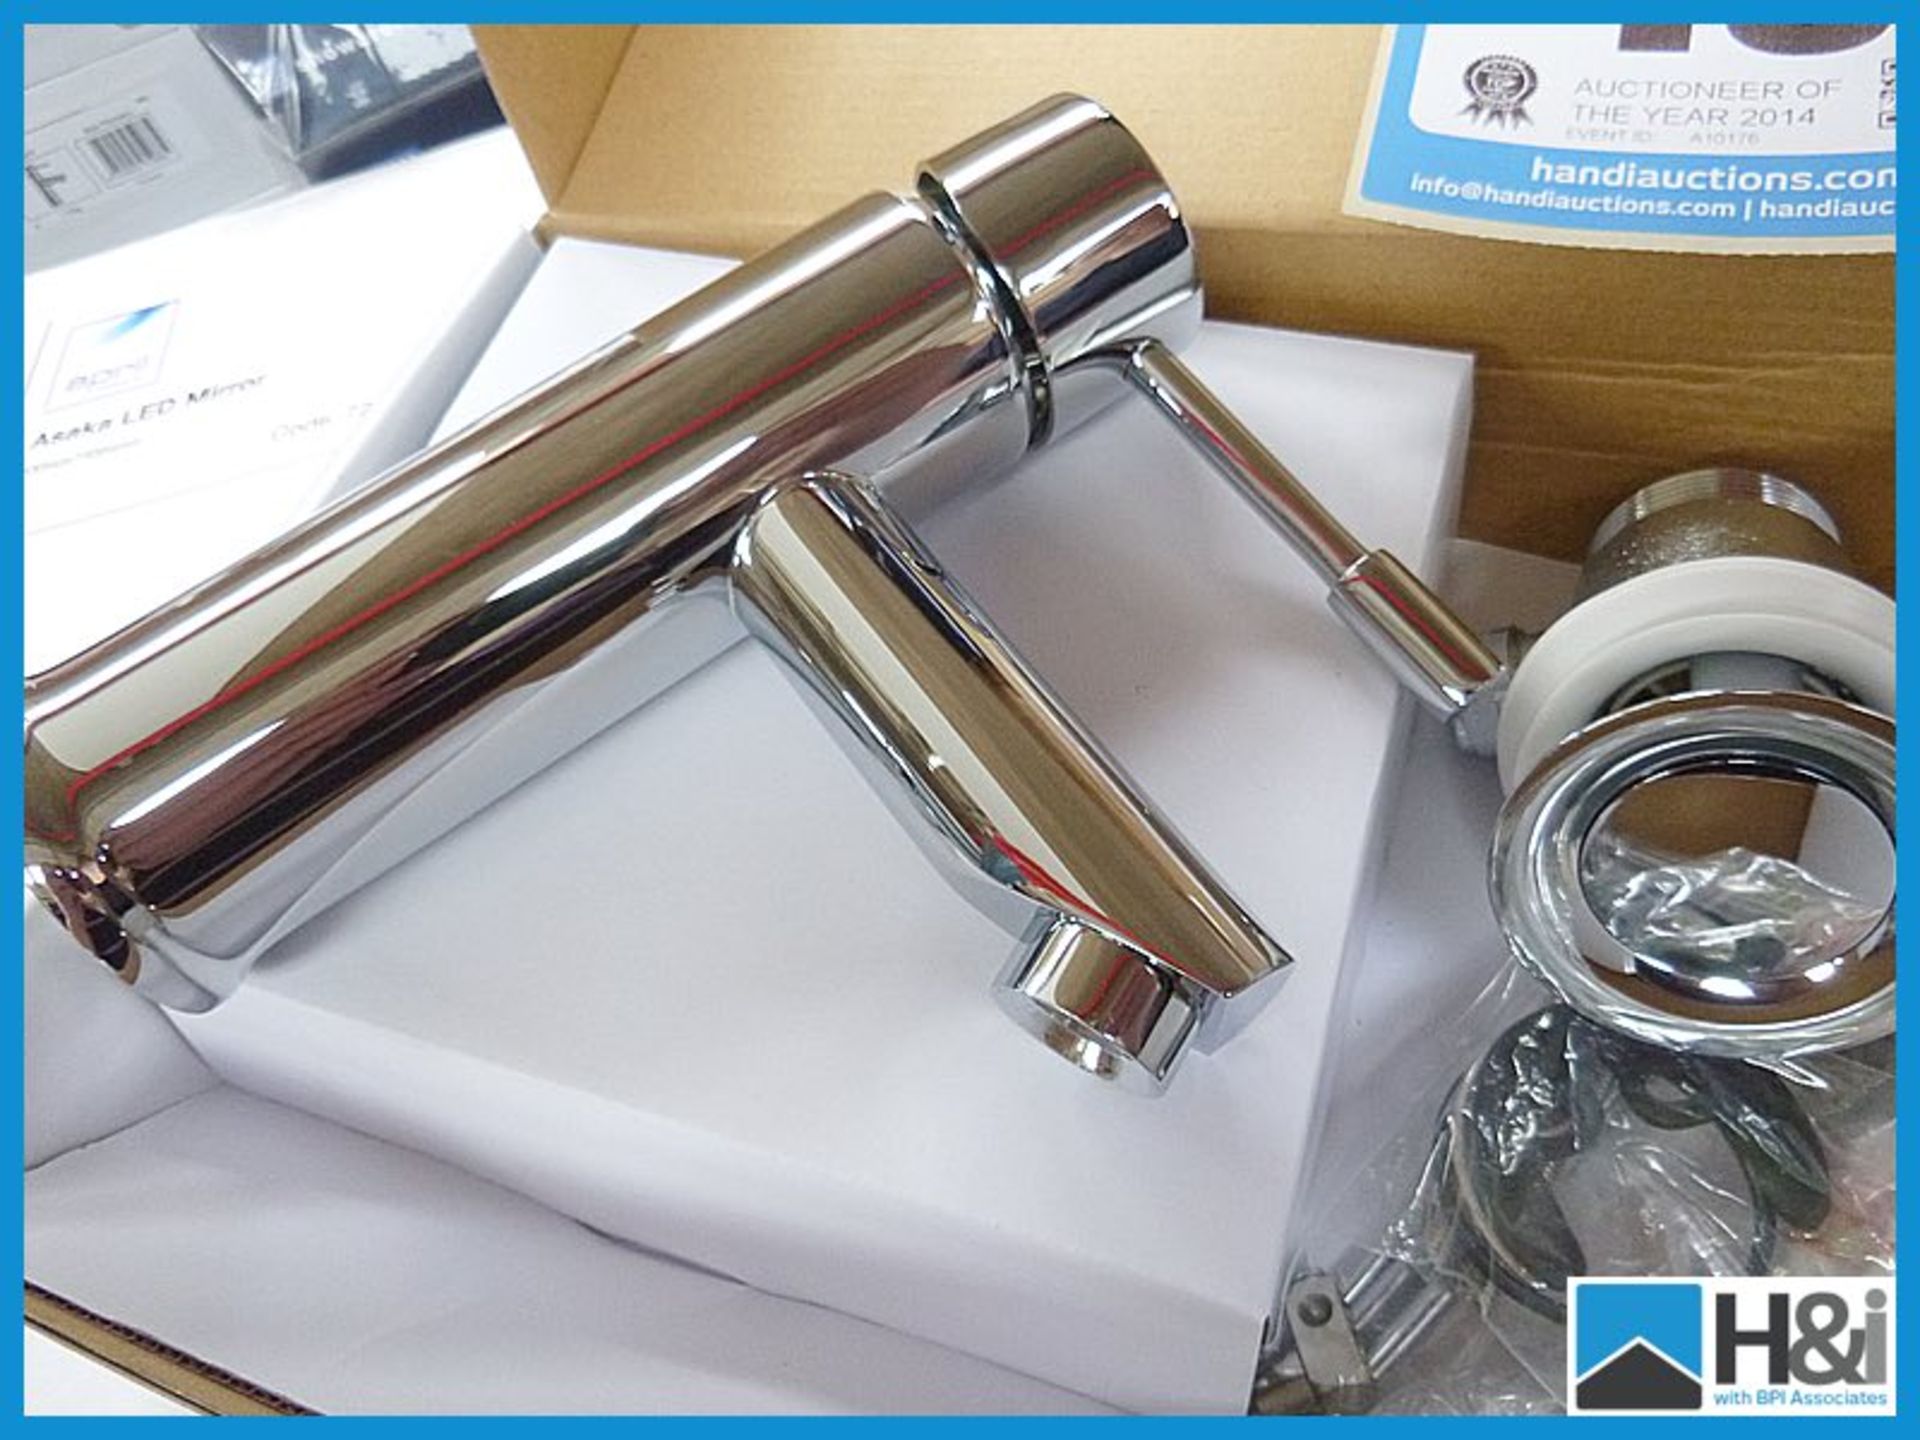 Mayfair designer basin monobloc chrome tap with pop up waste. Boxed and new. RRP £199 Appraisal: - Image 2 of 2